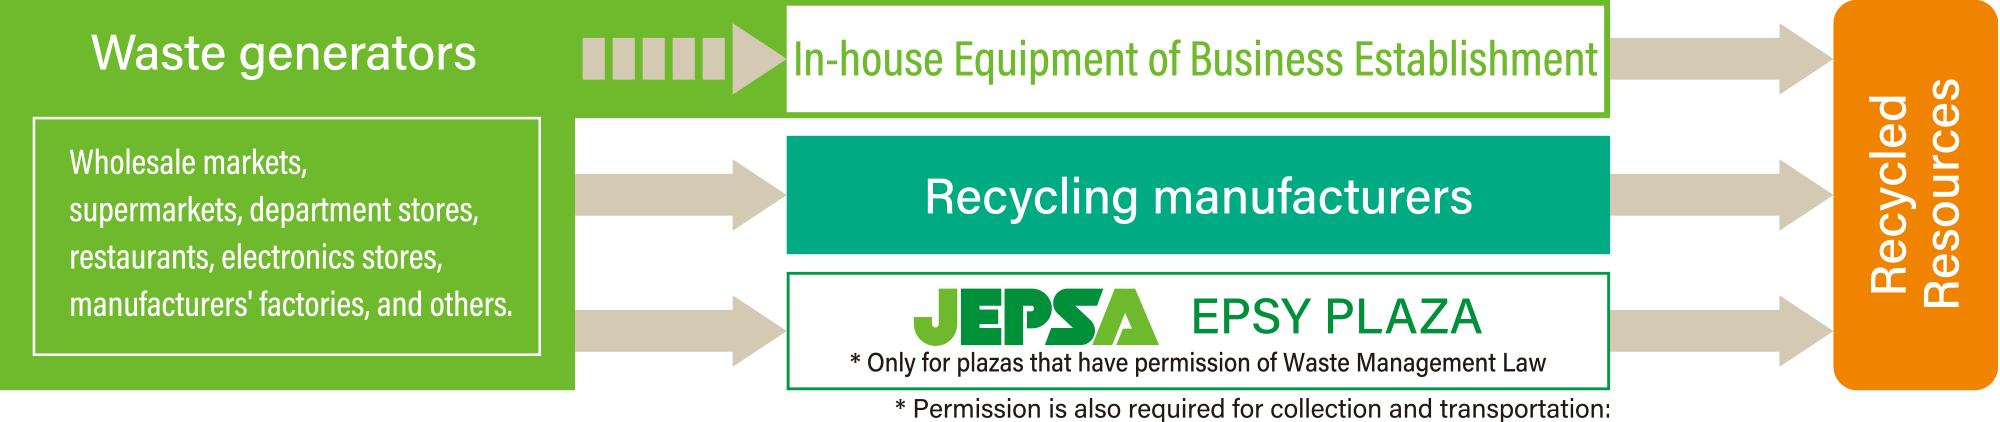 The Source of Recycled EPS is Mainly Industrial Waste